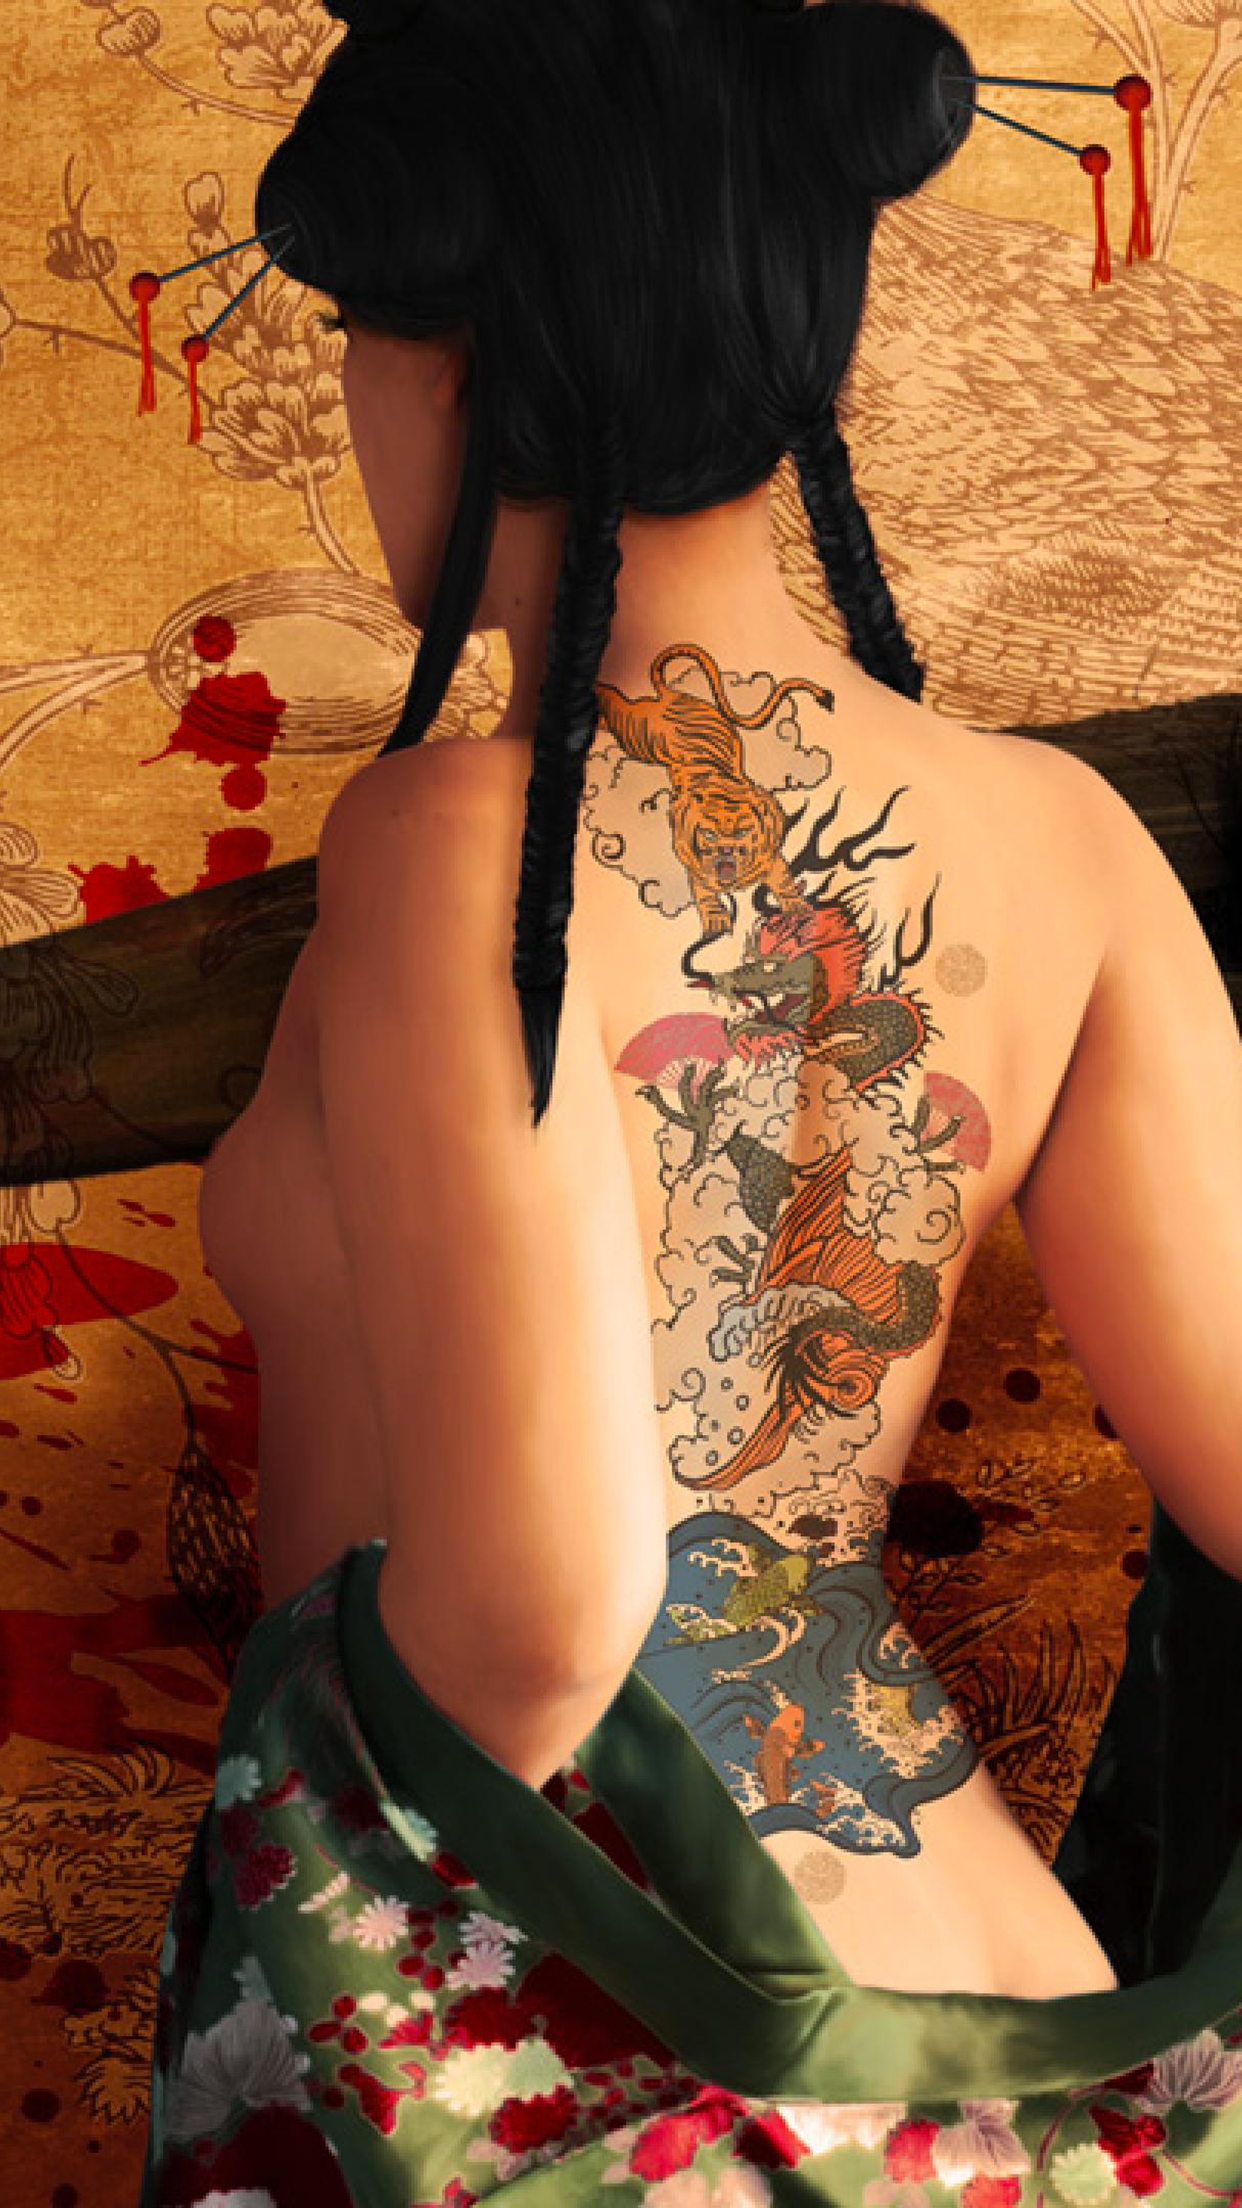 Hot Tattoo Girl Wallpapers